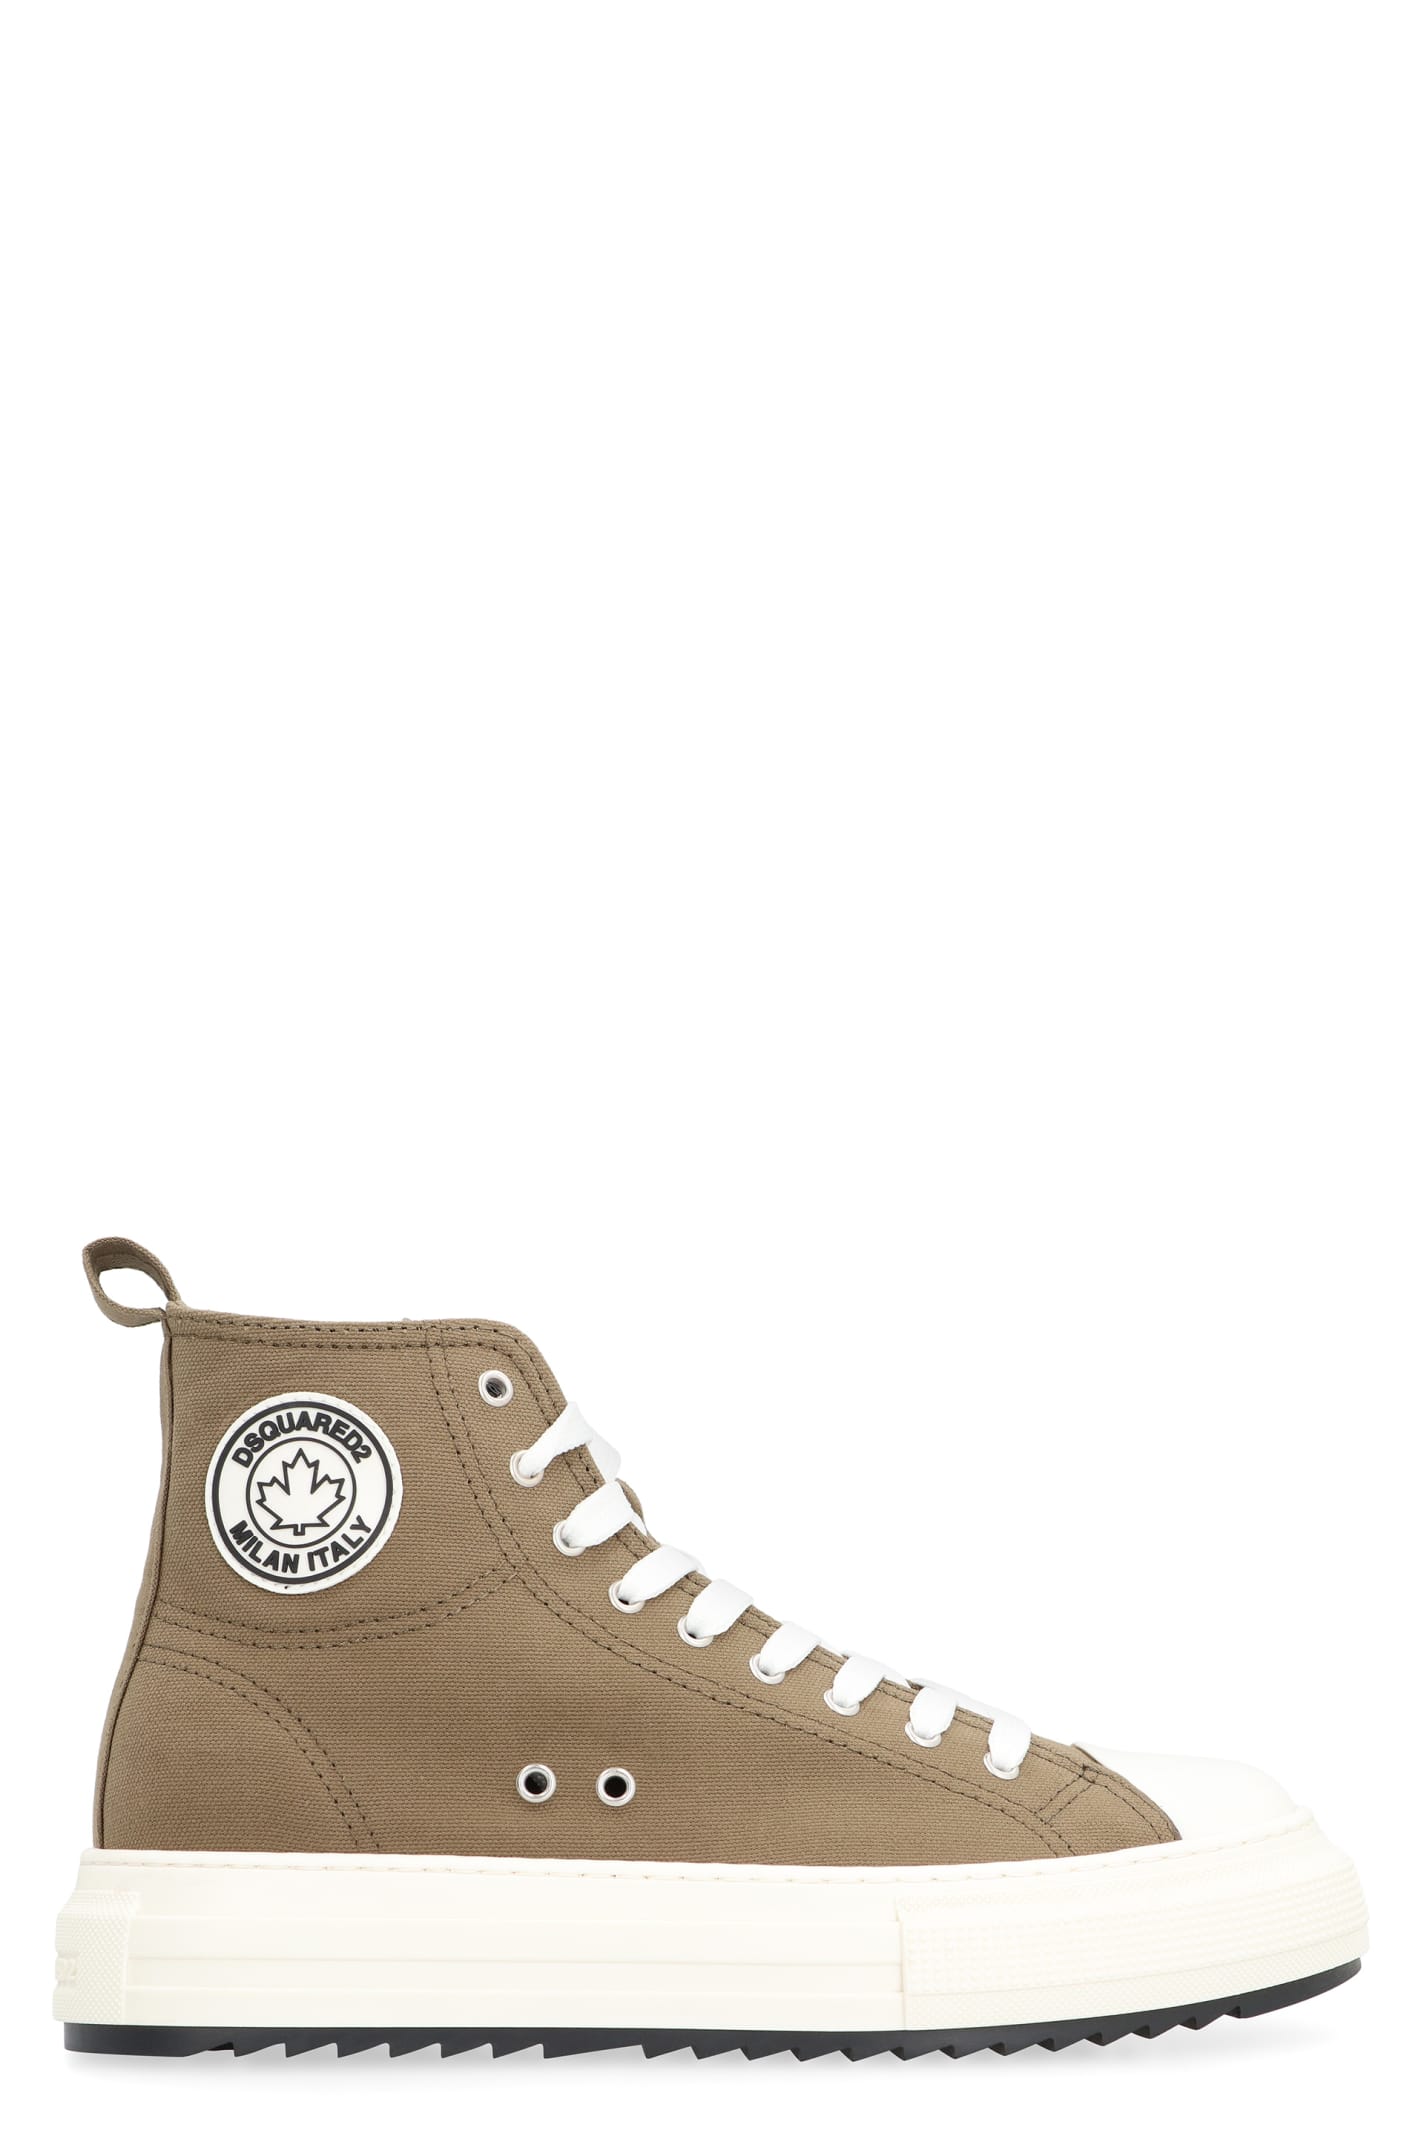 DSQUARED2 CANVAS HIGH-TOP SNEAKERS